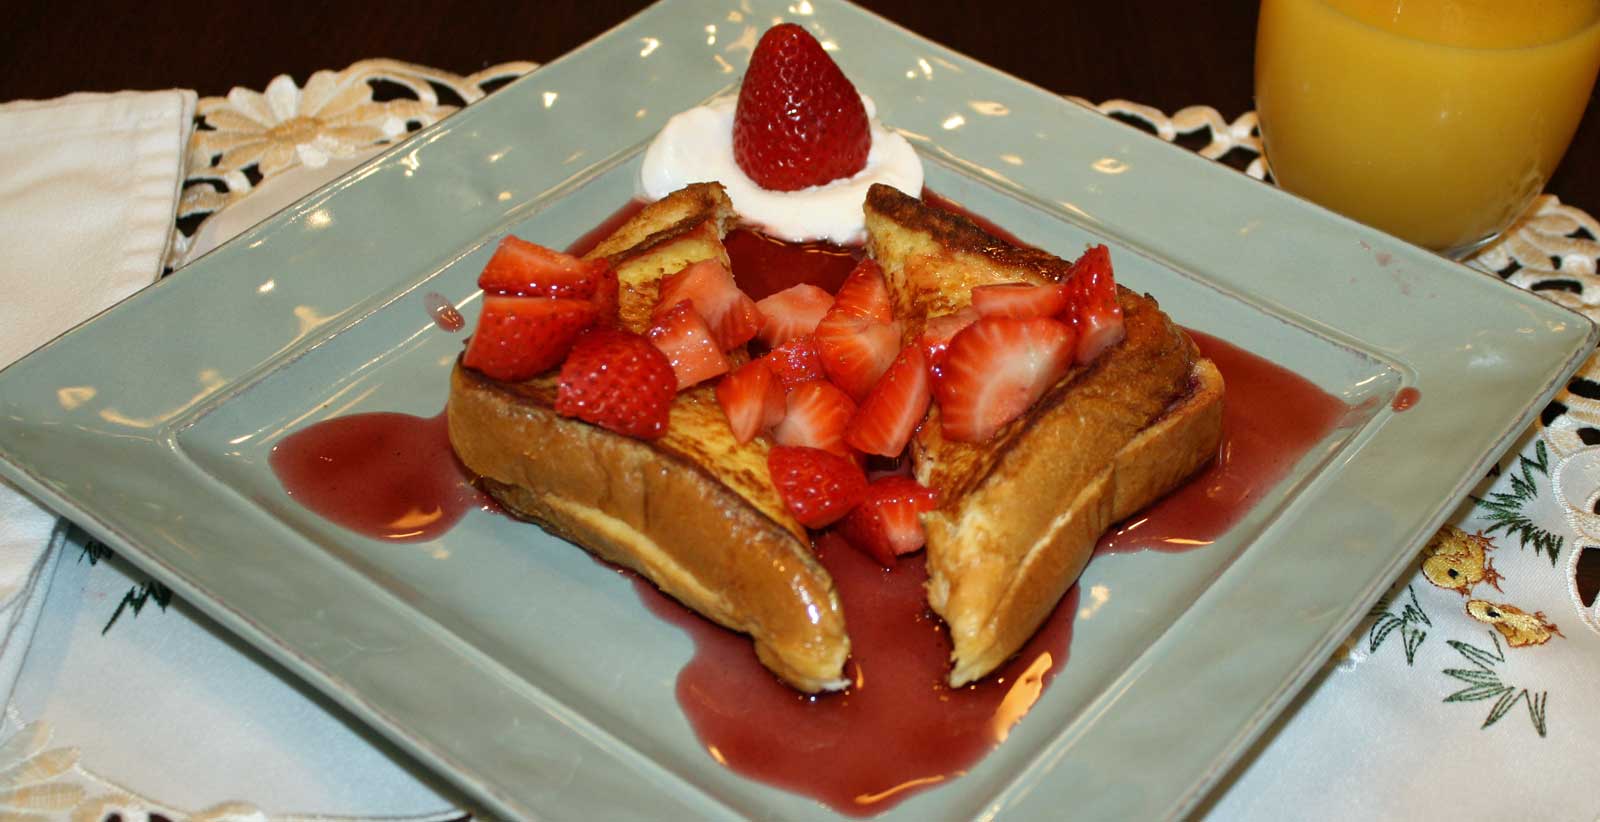 French toast with cream cheese filling, topped with diced strawberries and sauce